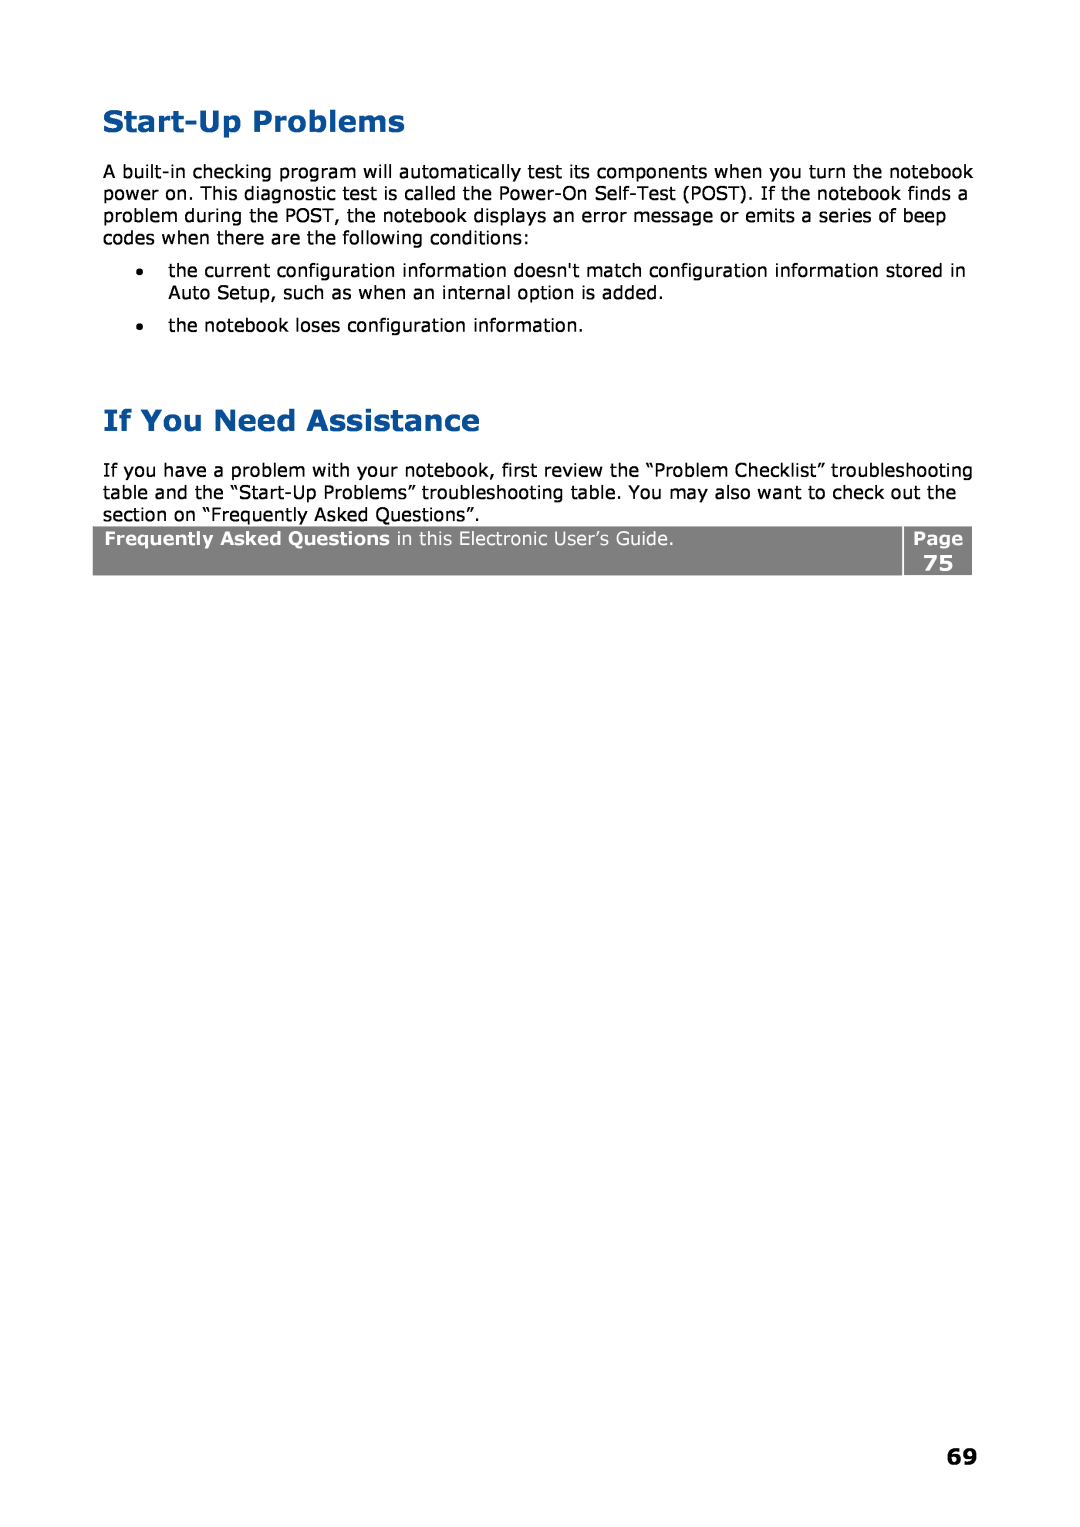 NEC P8510 Start-Up Problems, If You Need Assistance, Frequently Asked Questions in this Electronic User’s Guide, Page 